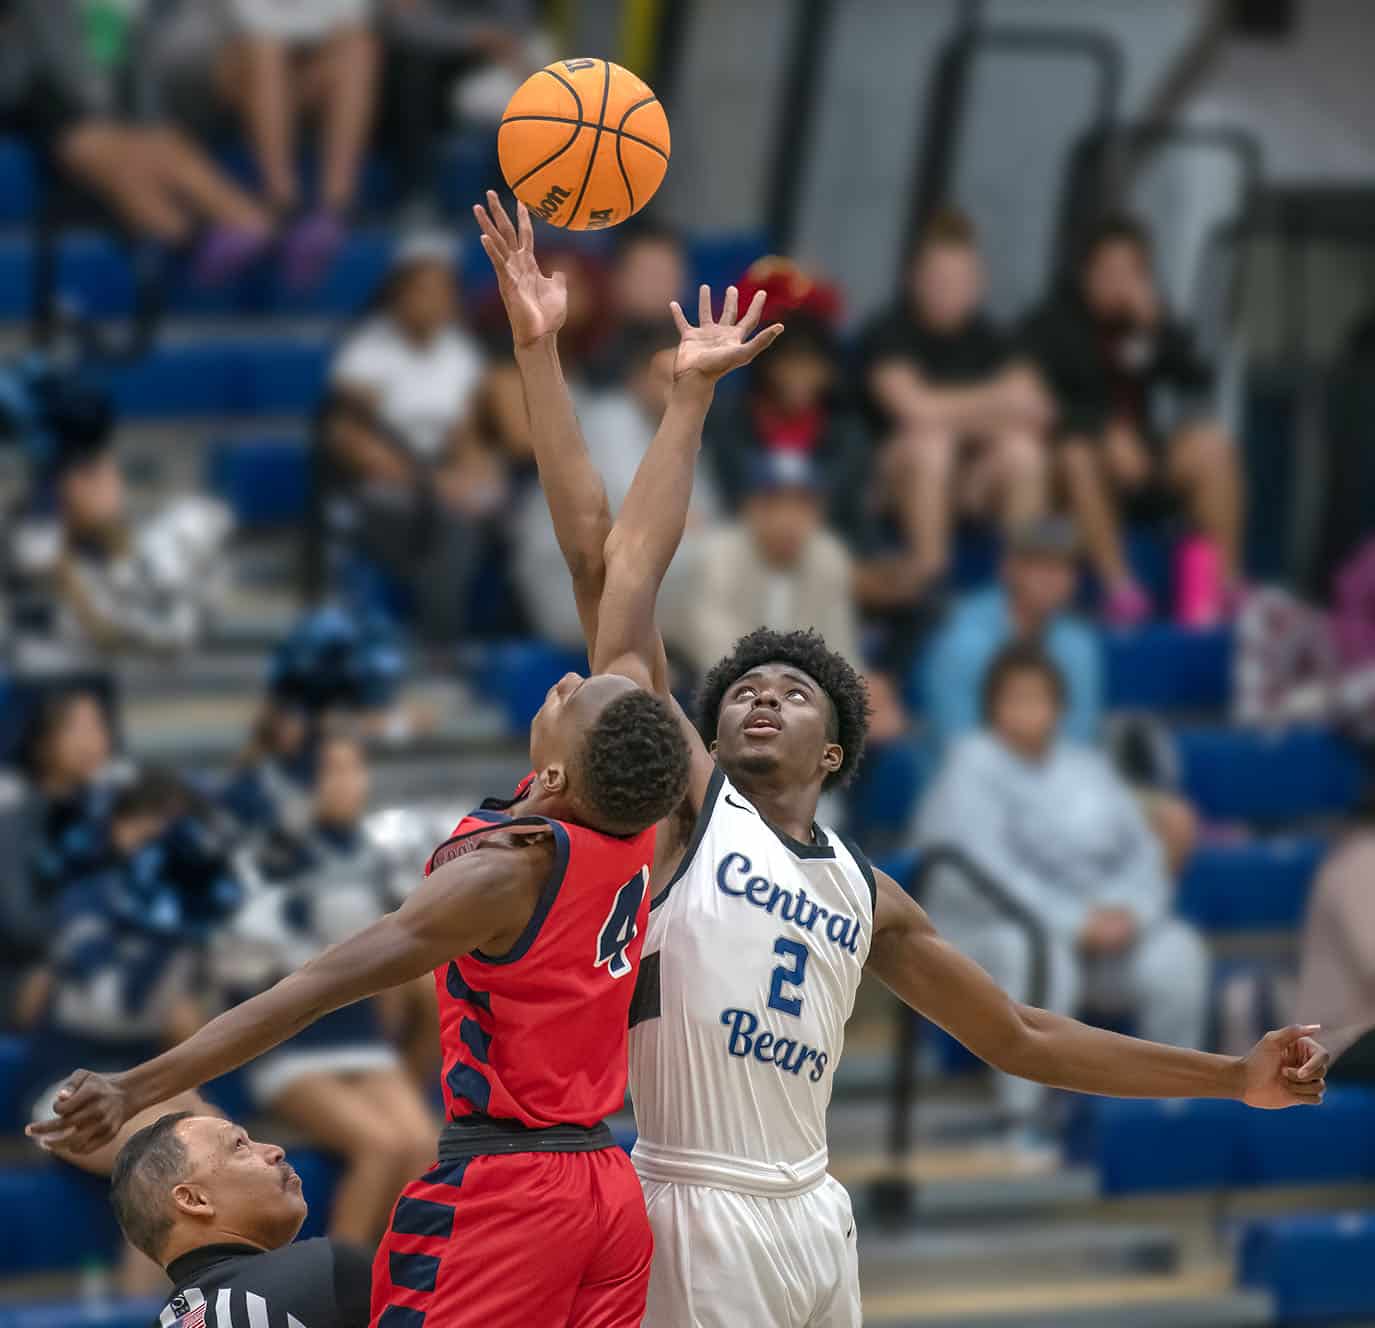 Springstead, 4, Caidell Gilbert vies for the jump ball with Central ,2, JD Watson Friday night at Central High School. Photo by JOE DiCRISTOFALO